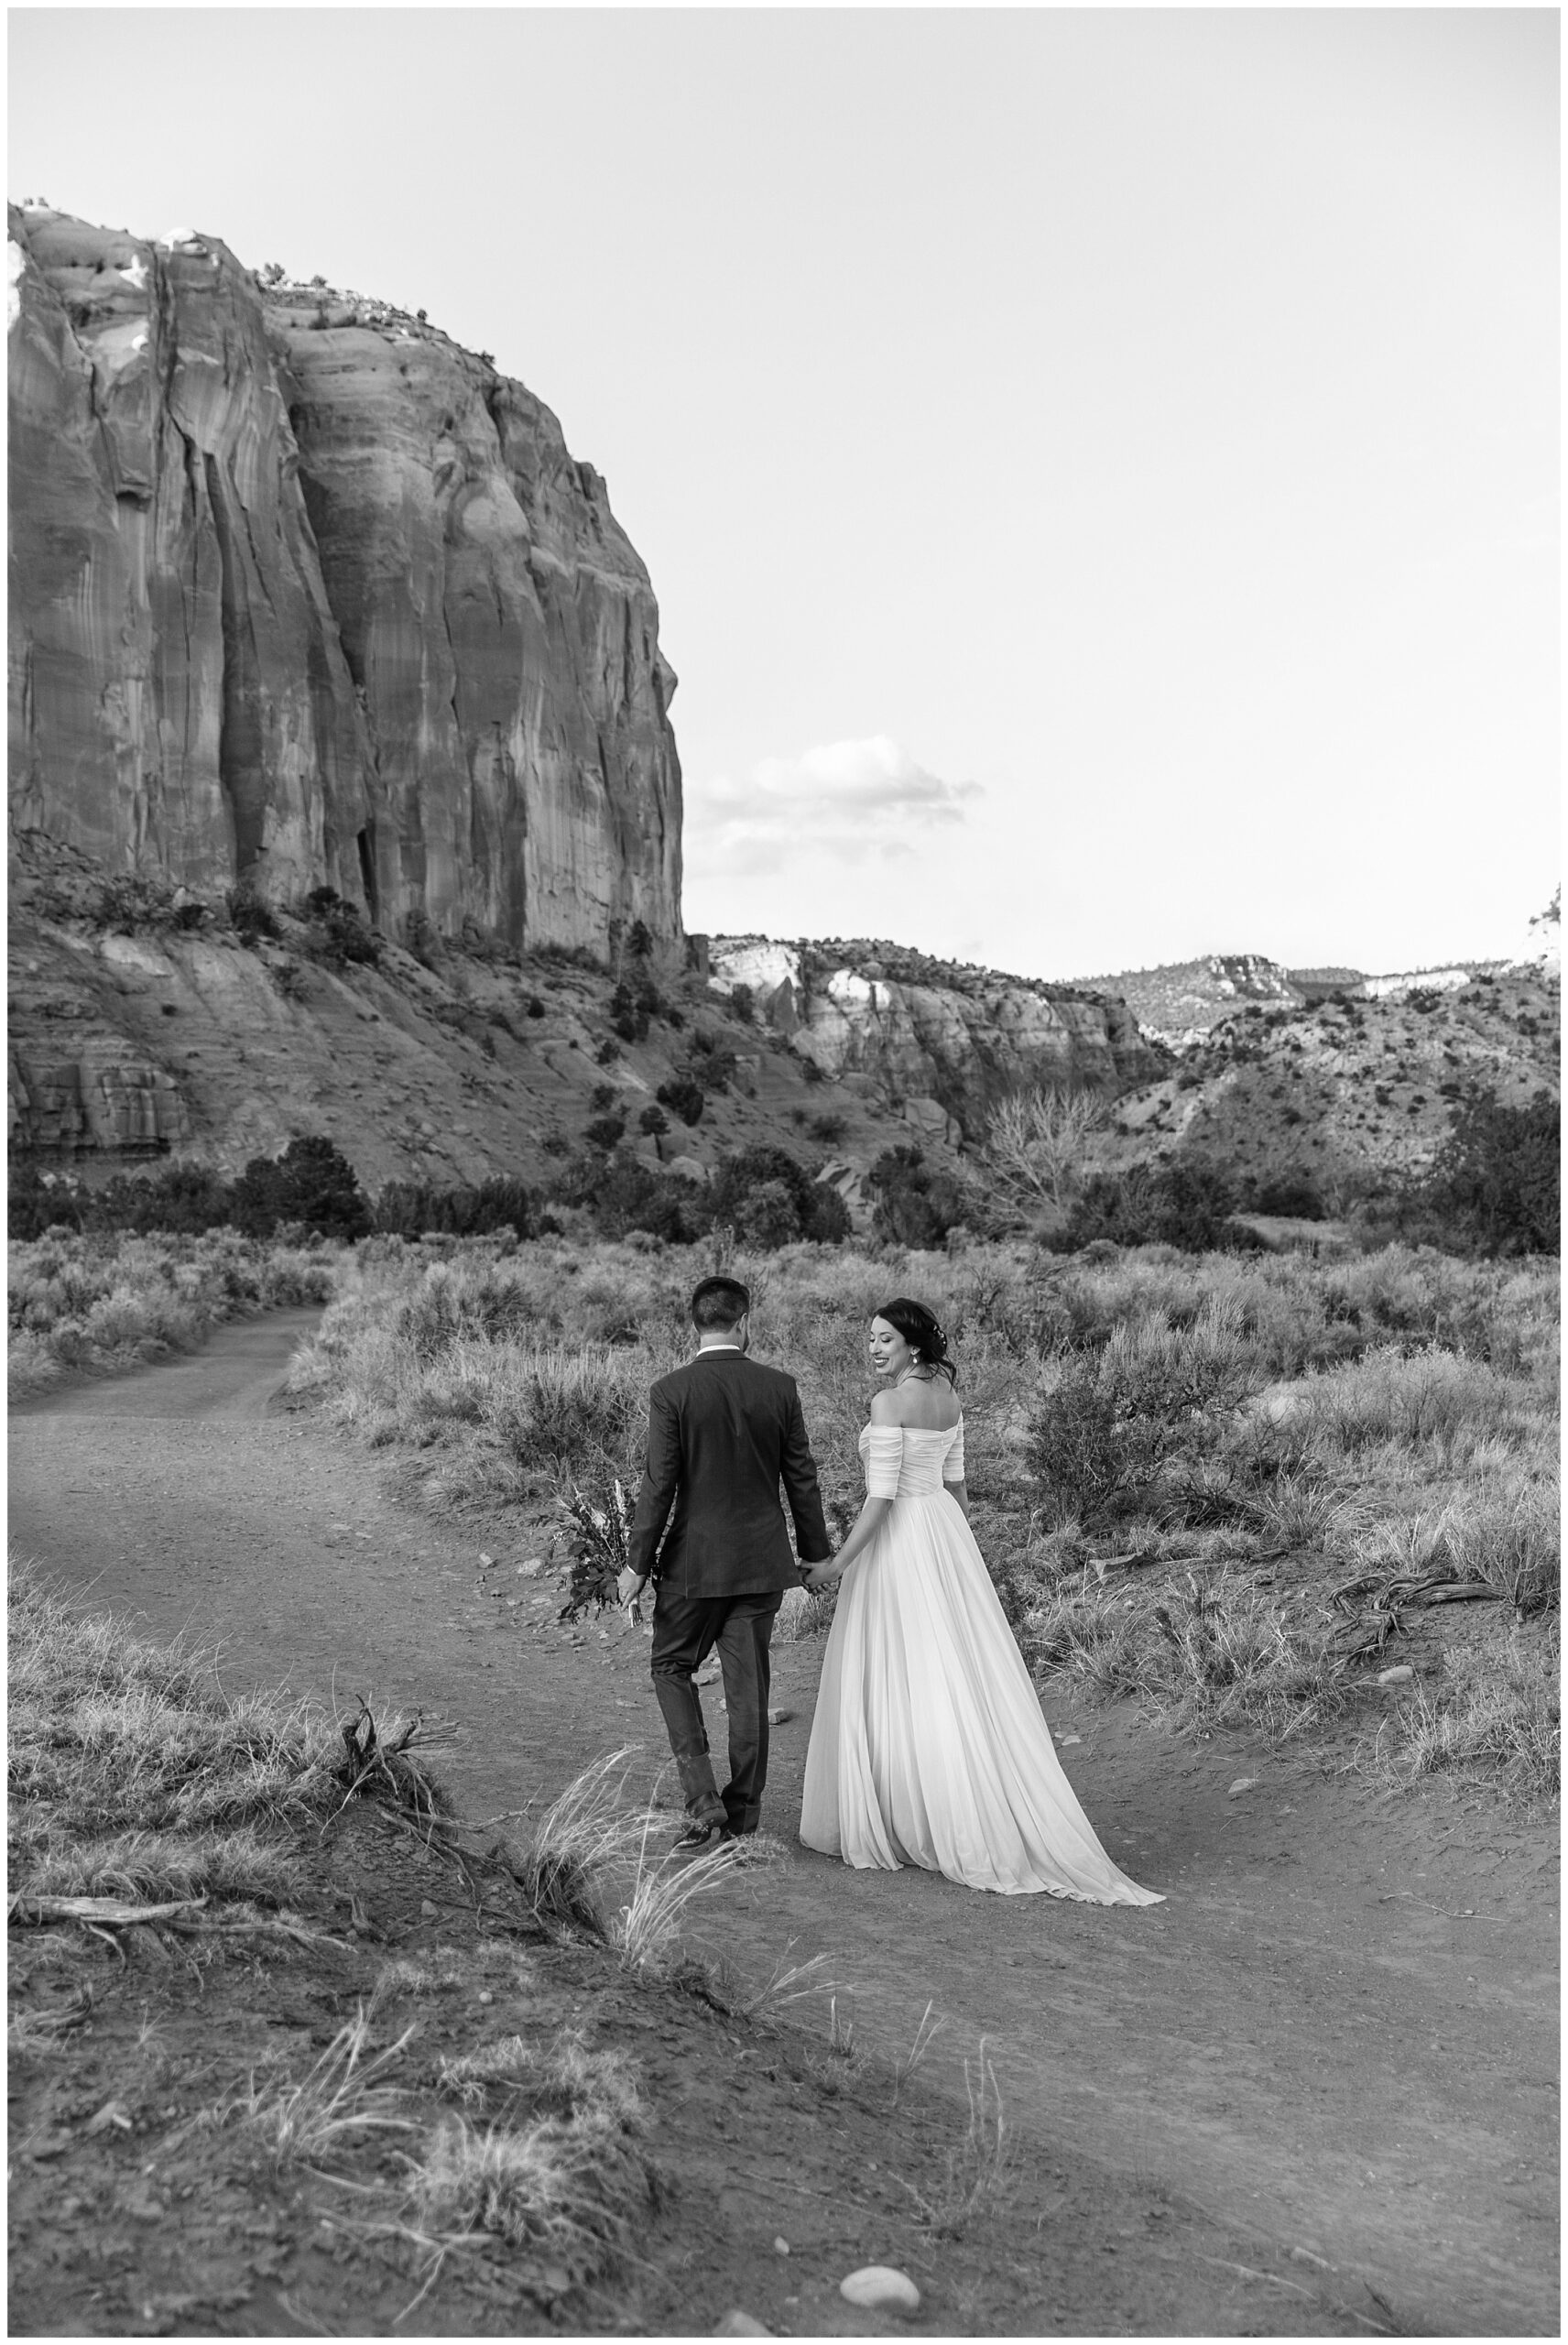 bride and groom in black and white at Georgia O'Keeffe's Ghost Ranch wedding venue